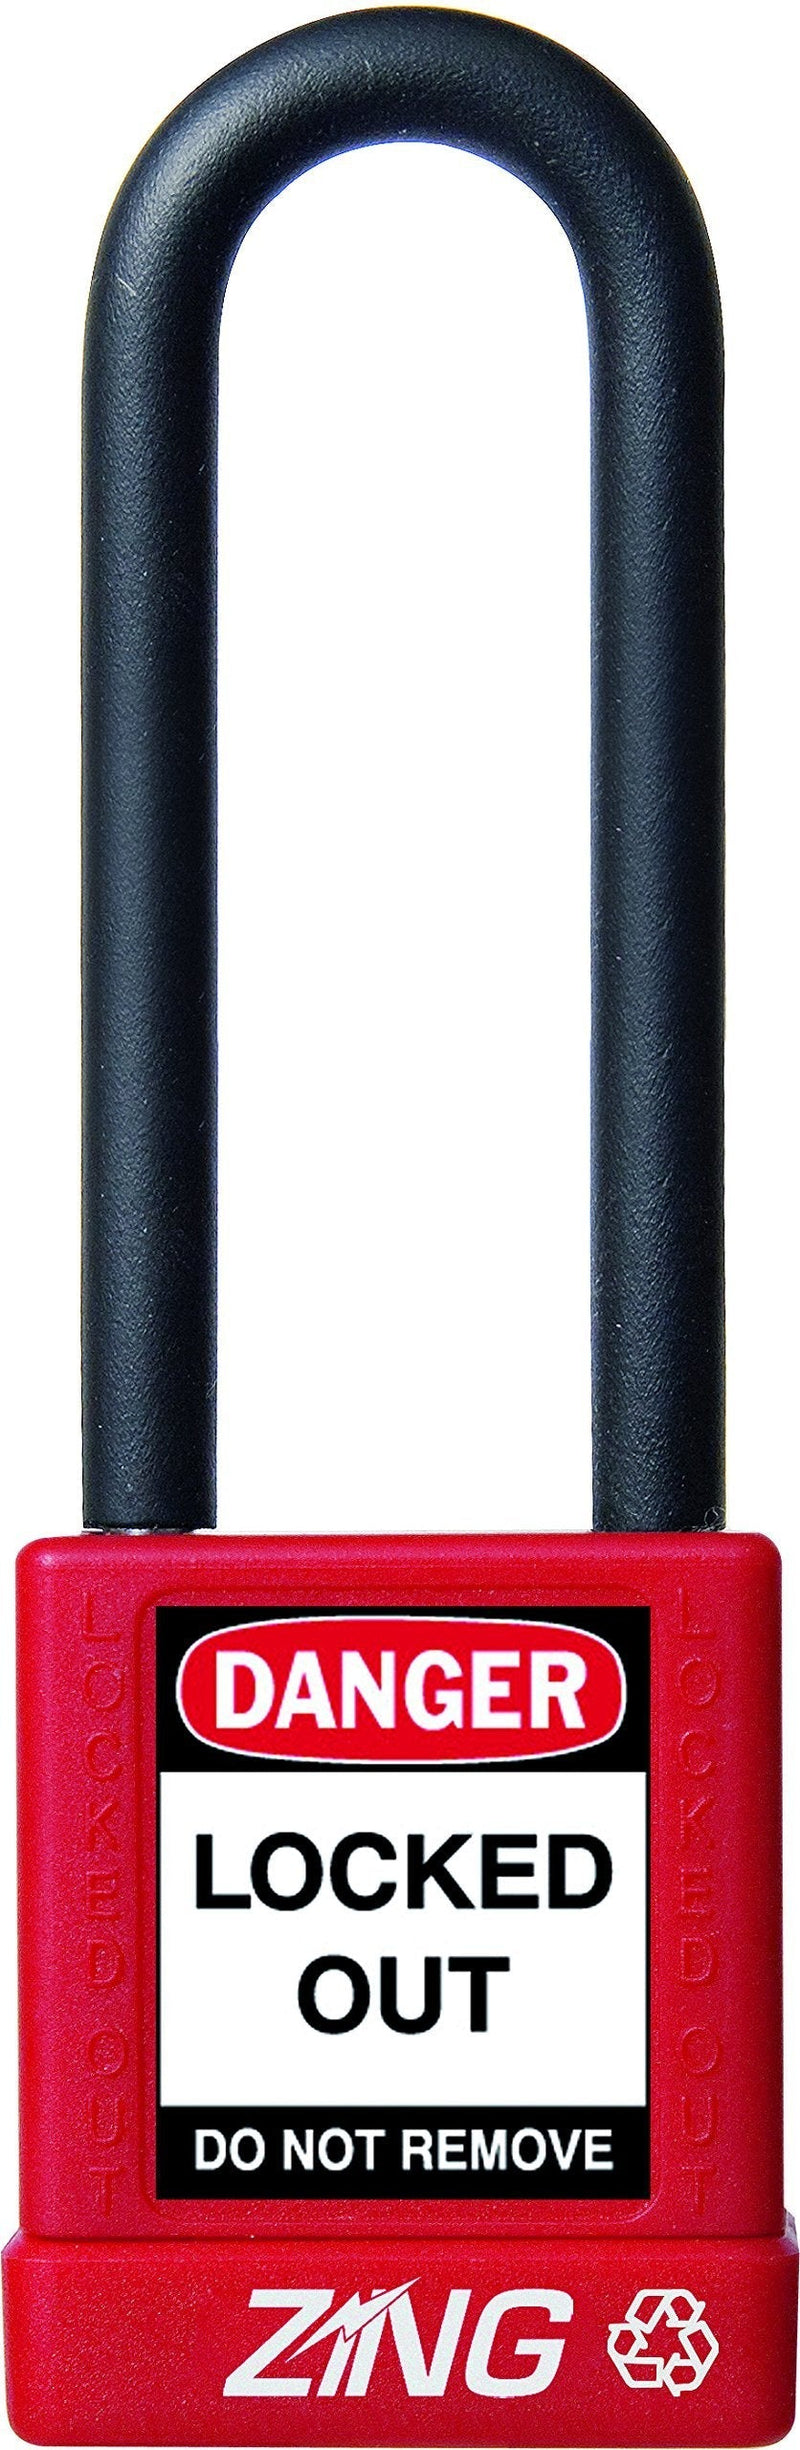 ZING 7046 RecycLock Safety Padlock, Keyed Different, 3" Shackle, 1-3/4" Body, Red - NewNest Australia